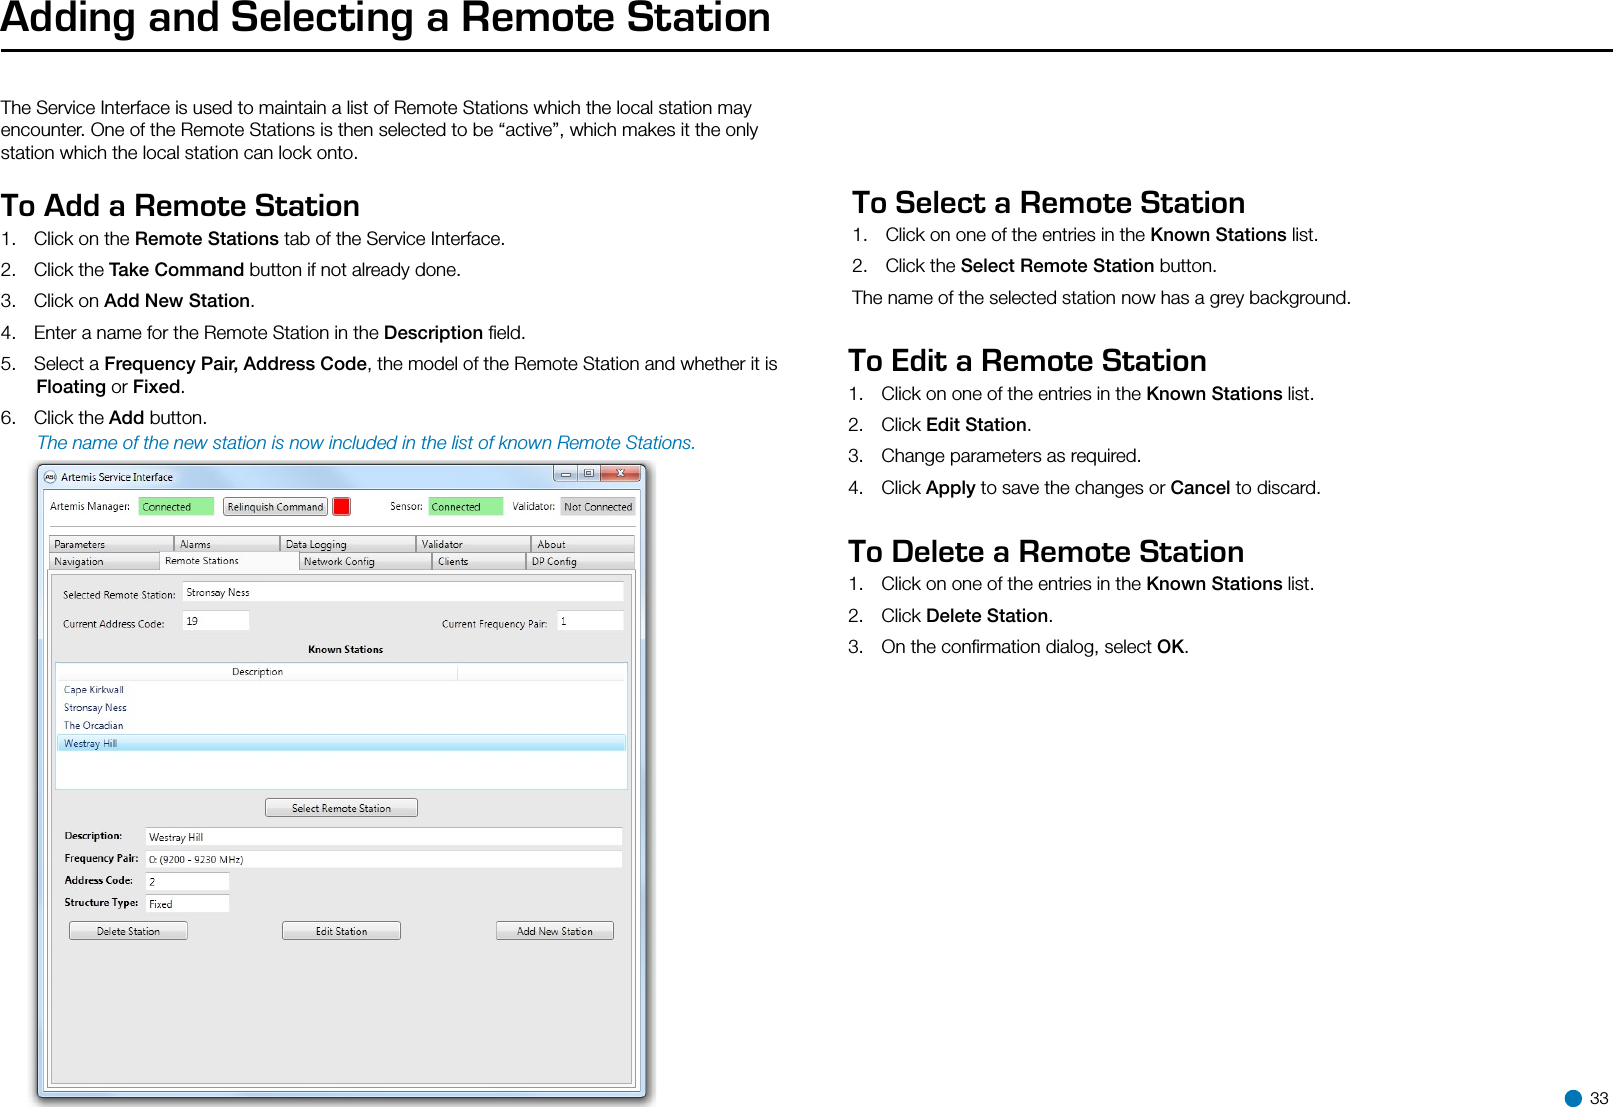 Adding and Selecting a Remote StationThe Service Interface is used to maintain a list of Remote Stations which the local station may encounter. One of the Remote Stations is then selected to be “active”, which makes it the only station which the local station can lock onto.To Add a Remote Station  1.  Click on the Remote Stations tab of the Service Interface.2.  Click the Take Command button if not already done.3.  Click on Add New Station.4.  Enter a name for the Remote Station in the Description ﬁeld.5.  Select a Frequency Pair, Address Code, the model of the Remote Station and whether it is Floating or Fixed. 6.  Click the Add button.       The name of the new station is now included in the list of known Remote Stations.To Select a Remote Station   1.  Click on one of the entries in the Known Stations list.2.  Click the Select Remote Station button.The name of the selected station now has a grey background.To Edit a Remote Station 1.  Click on one of the entries in the Known Stations list.2.  Click Edit Station.3.  Change parameters as required.4.  Click Apply to save the changes or Cancel to discard.To Delete a Remote Station  1.  Click on one of the entries in the Known Stations list.2.  Click Delete Station.3.  On the conﬁrmation dialog, select OK. 33